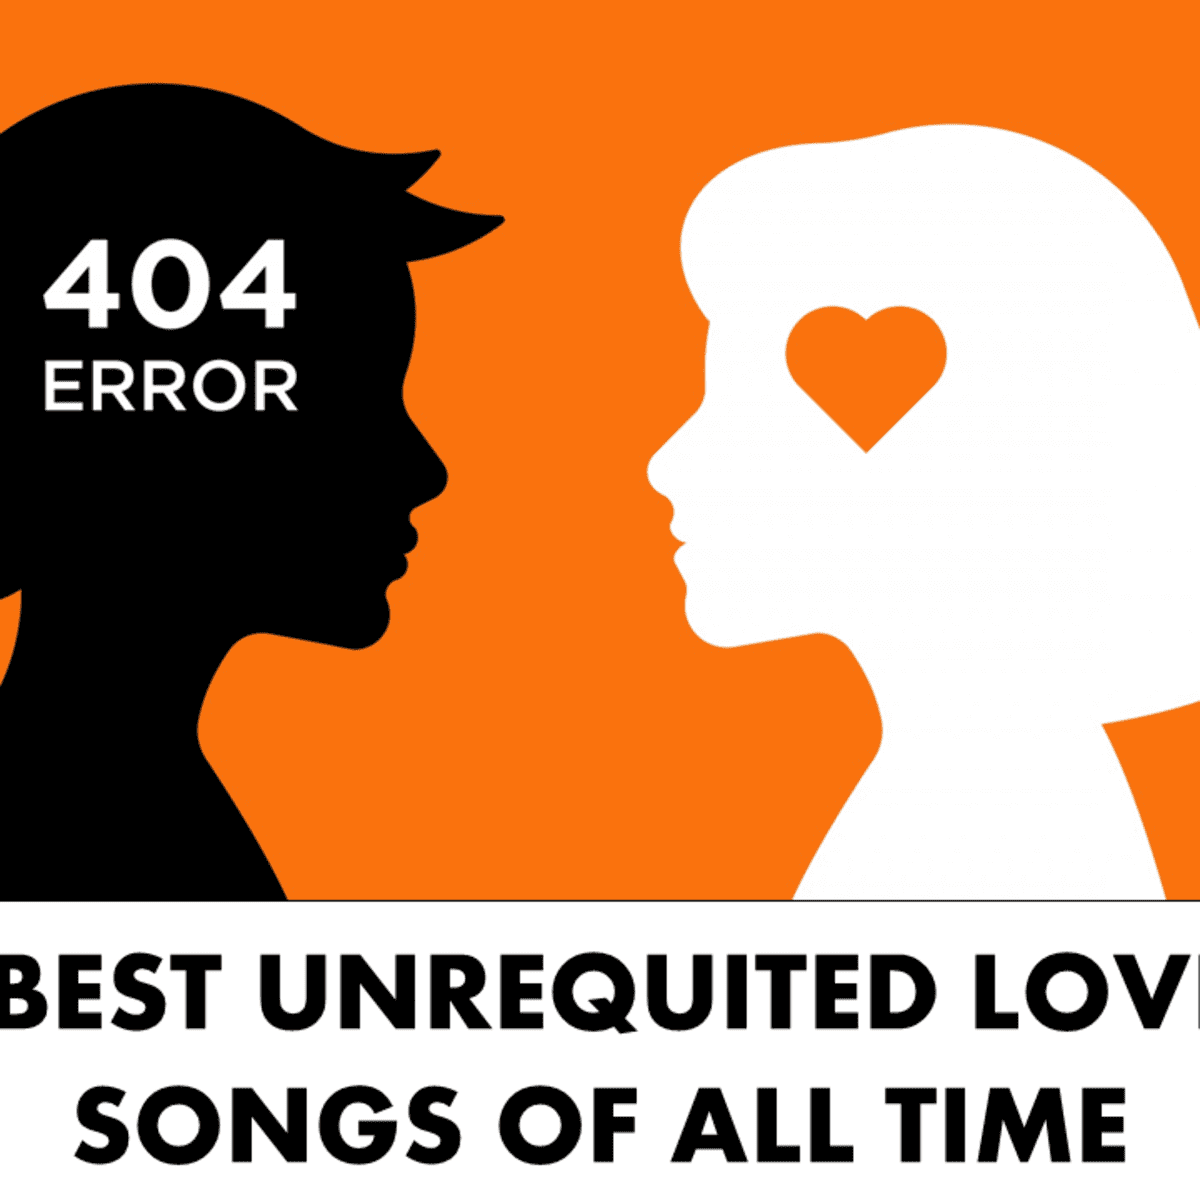 Unrequited love r&b songs about 21 Songs